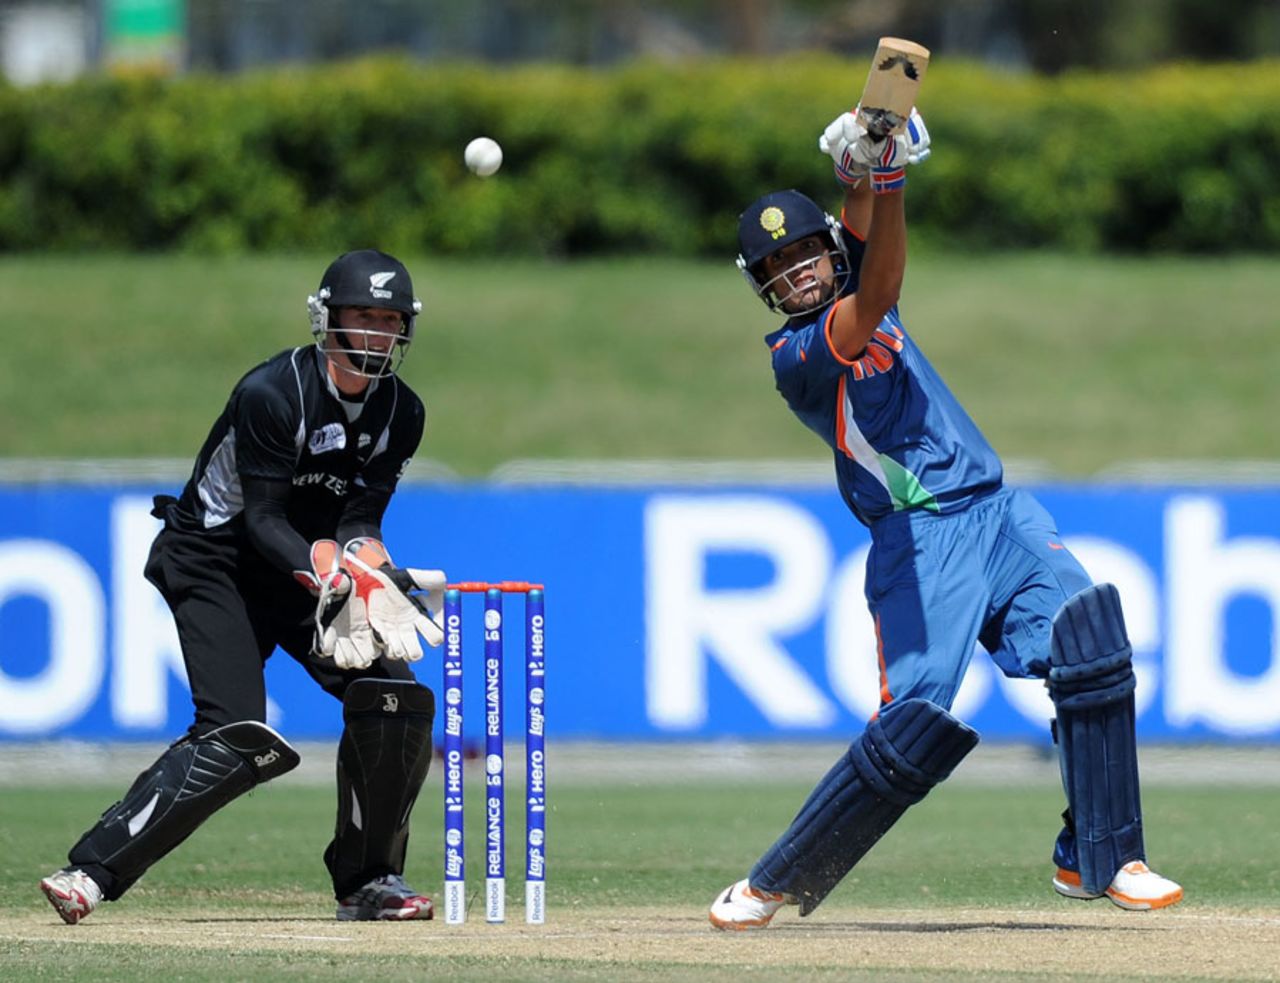 Opener Prashant Chopra set up India with a half-century, India v New Zealand, ICC Under-19 World Cup, semi-final, Townsville, August 23, 2012